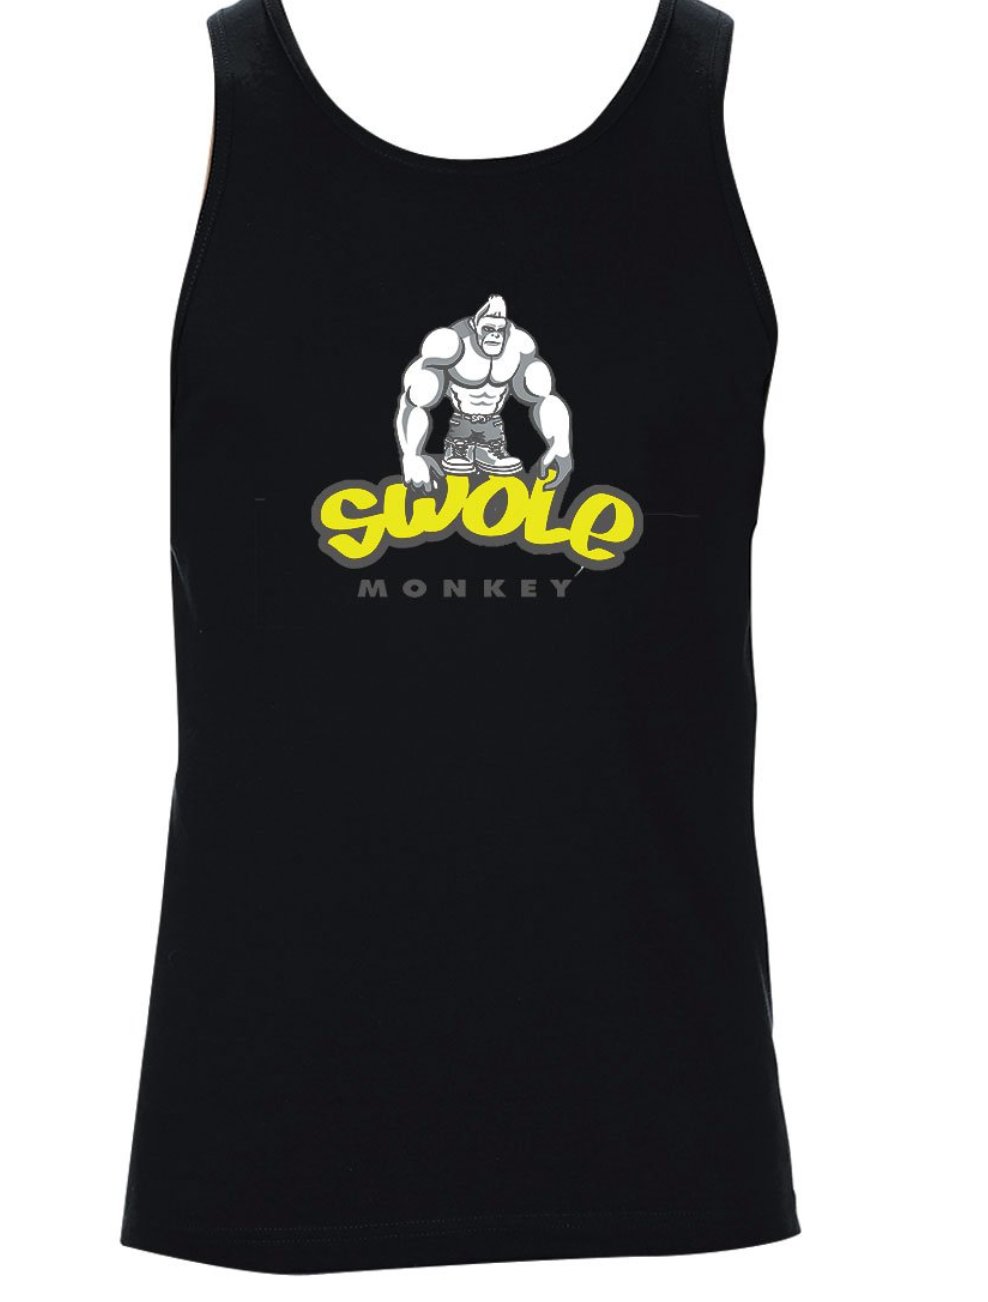 Swole Tank Top Bodybuilding Gift Fitness Shirts Fitness Tank Top